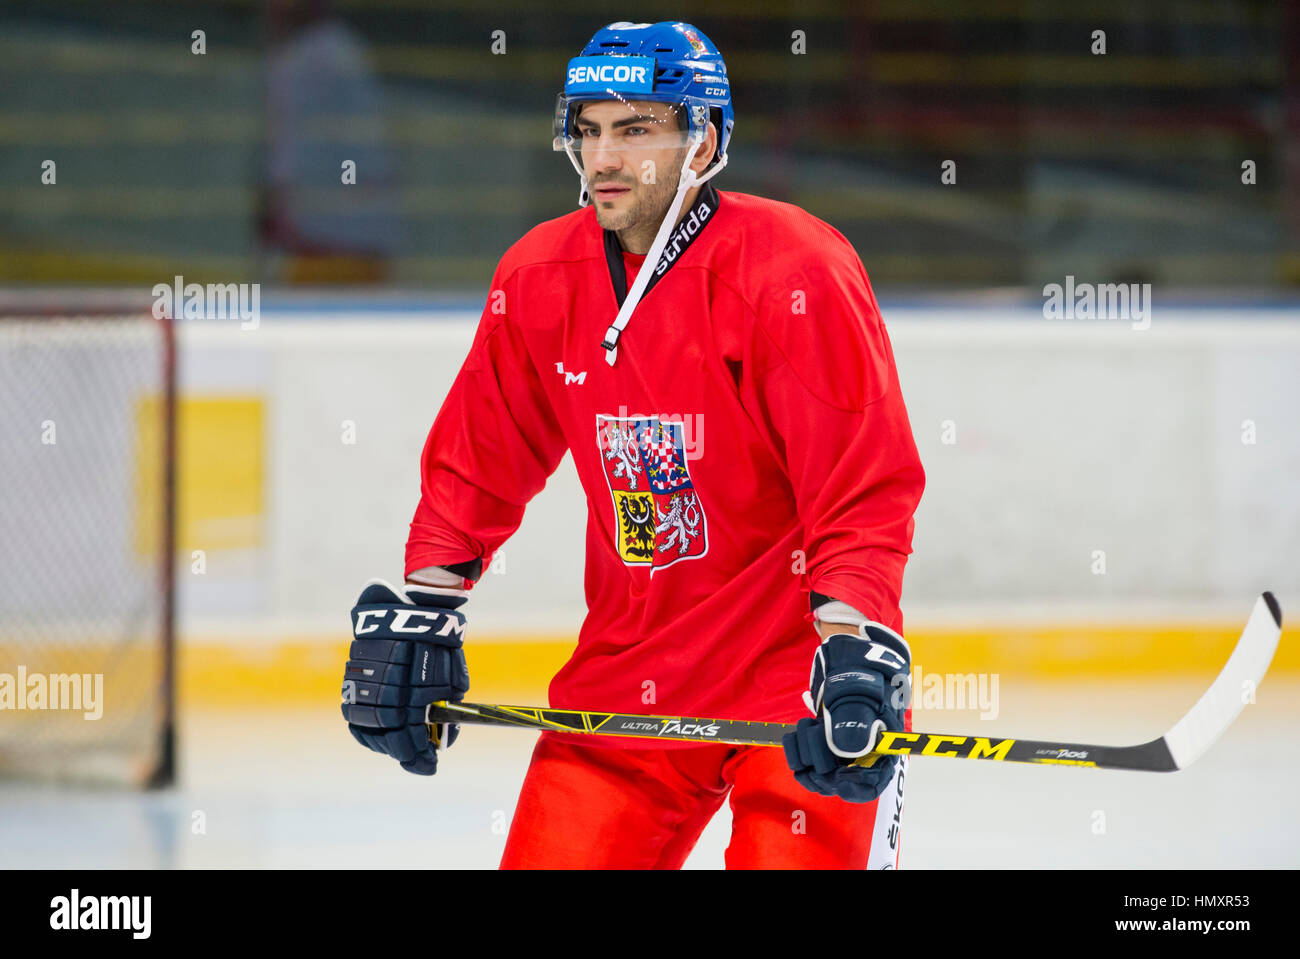 Prague, Czech Republic. 07th Feb, 2017. The Czech national ice-hockey team's player Petr Jelinek in action during the training session prior to the February Sweden Games in Gothenburg in Prague, Czech Republic, February 7, 2017. Sweden Games, the third part of the European Hockey Tour (EHT) series, will take place on February 9-12. Credit: Vit Simanek/CTK Photo/Alamy Live News Stock Photo